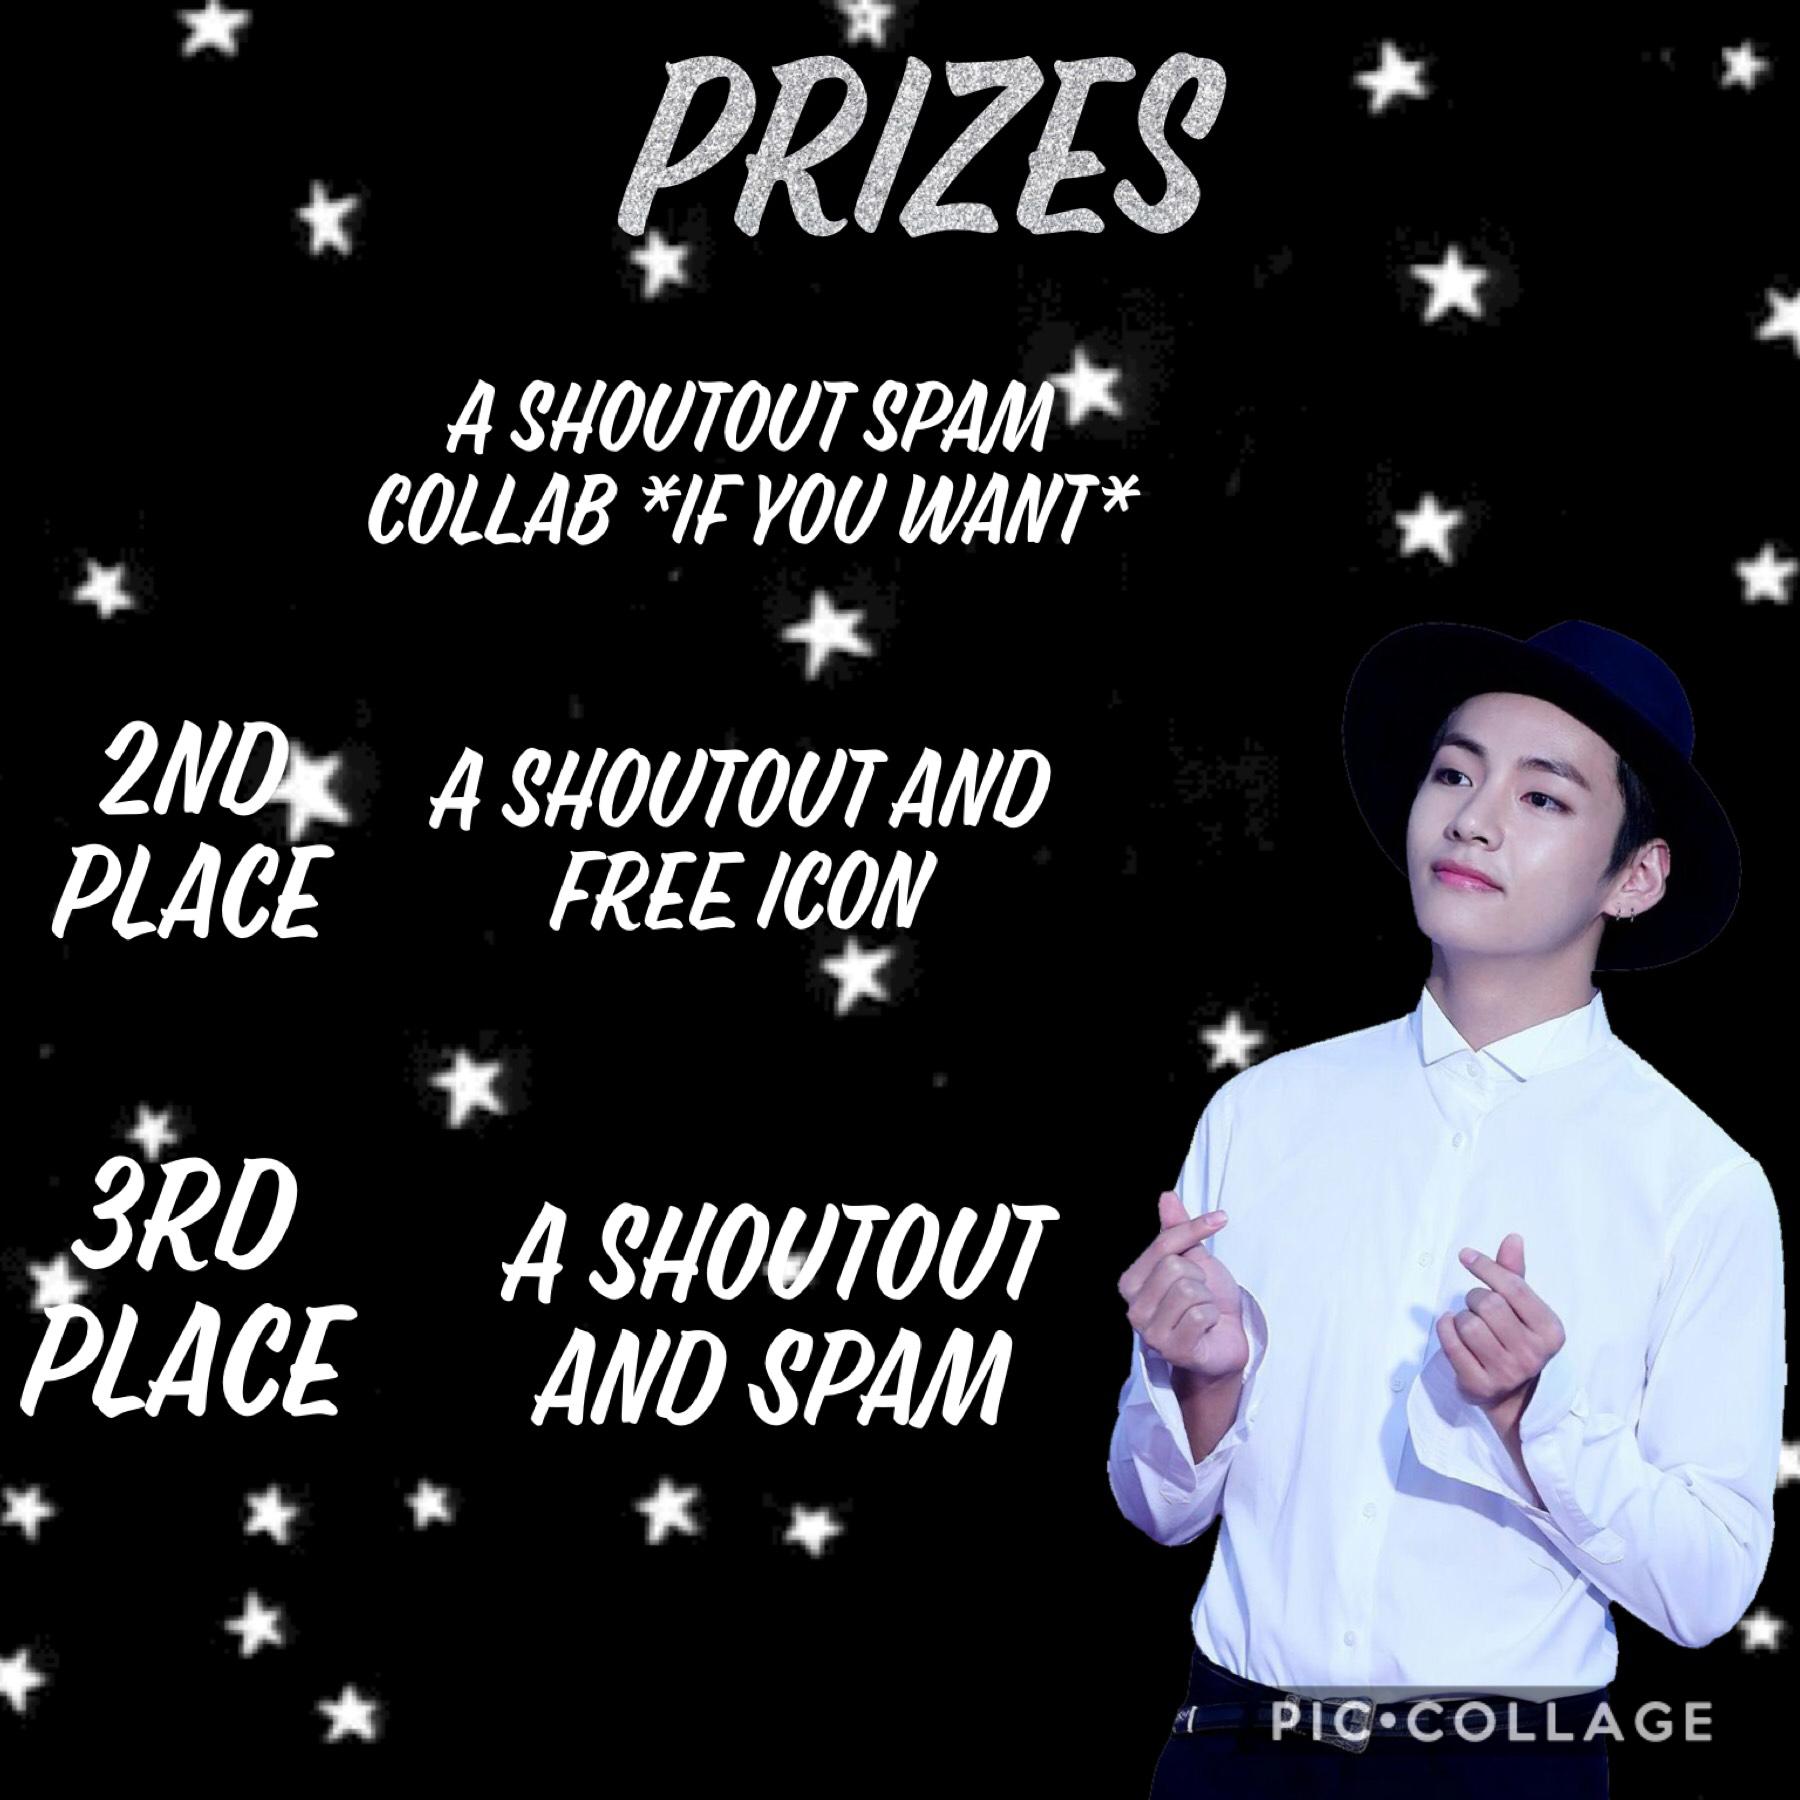 🥰Please join my contest🥰